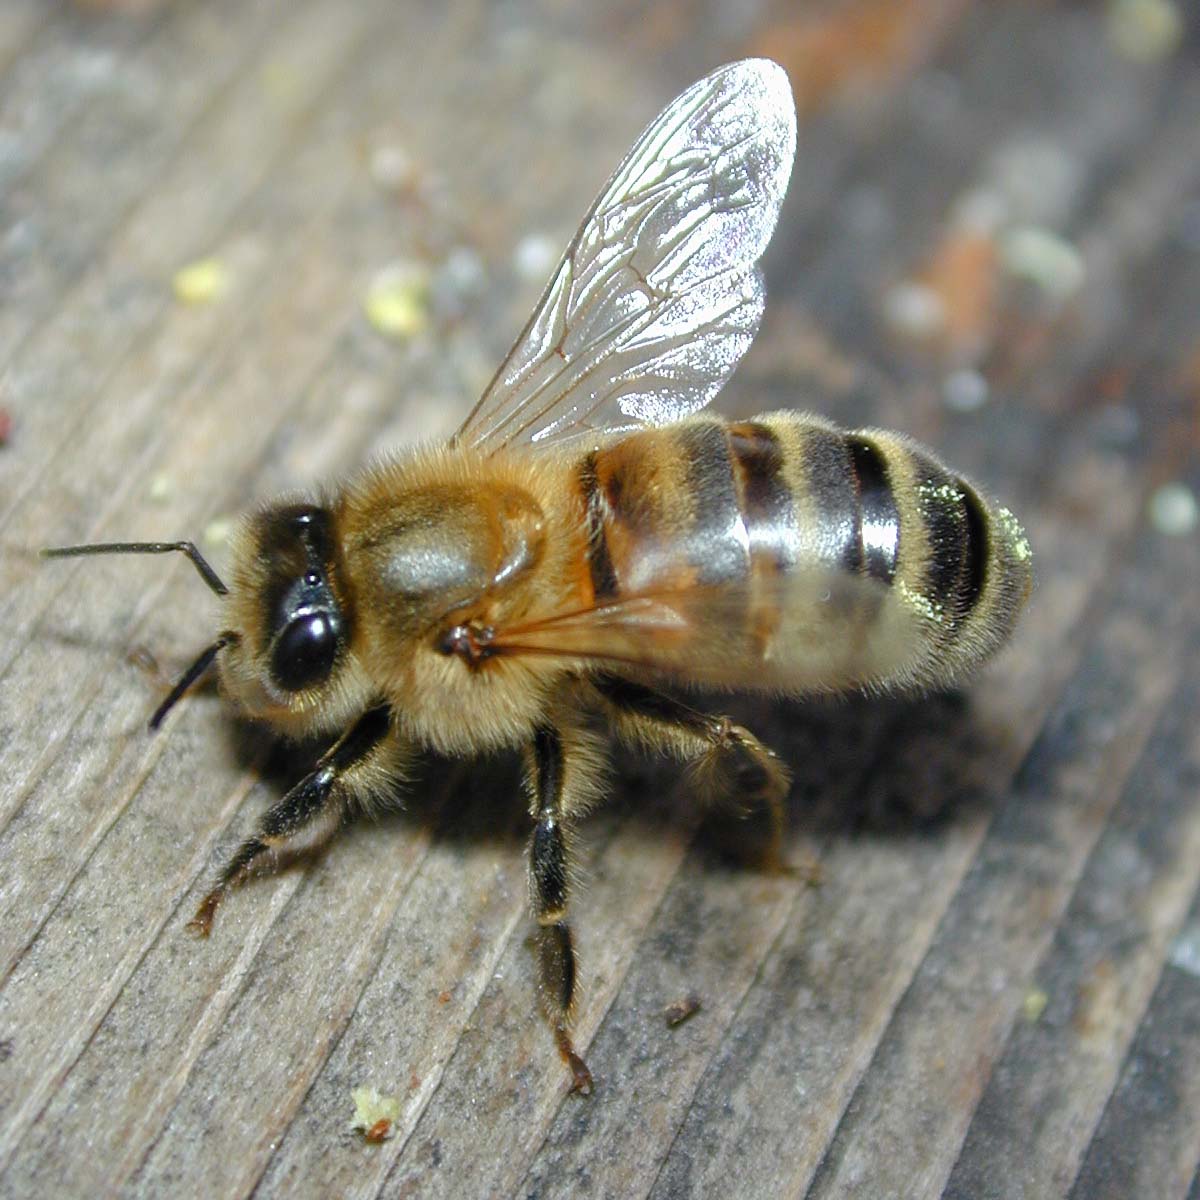 Bees  - Makes annoying buzzing sound, stings.